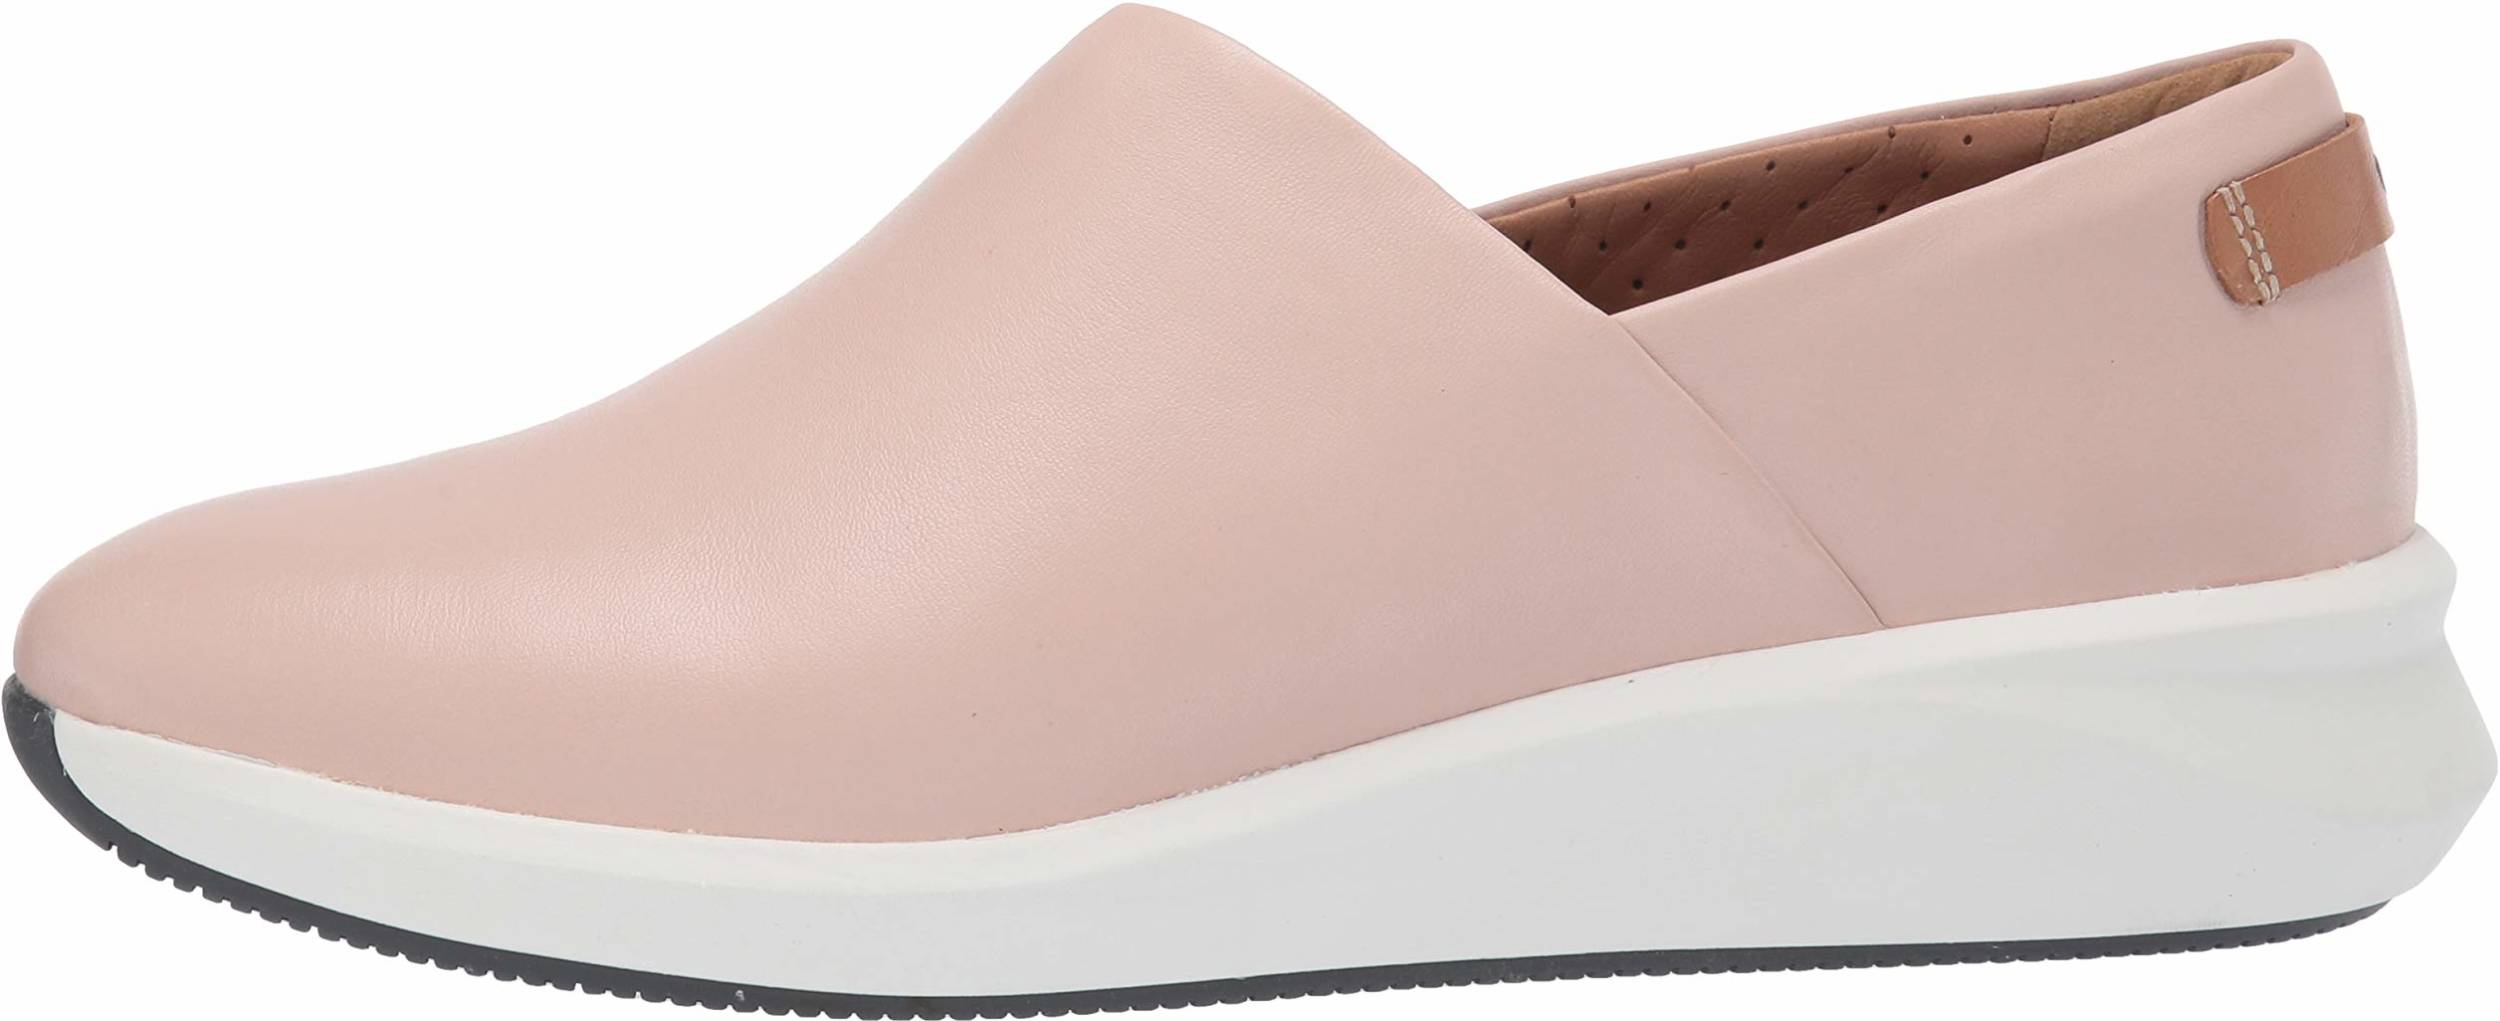 Only $51 + Review of Clarks Un Rio Rise 